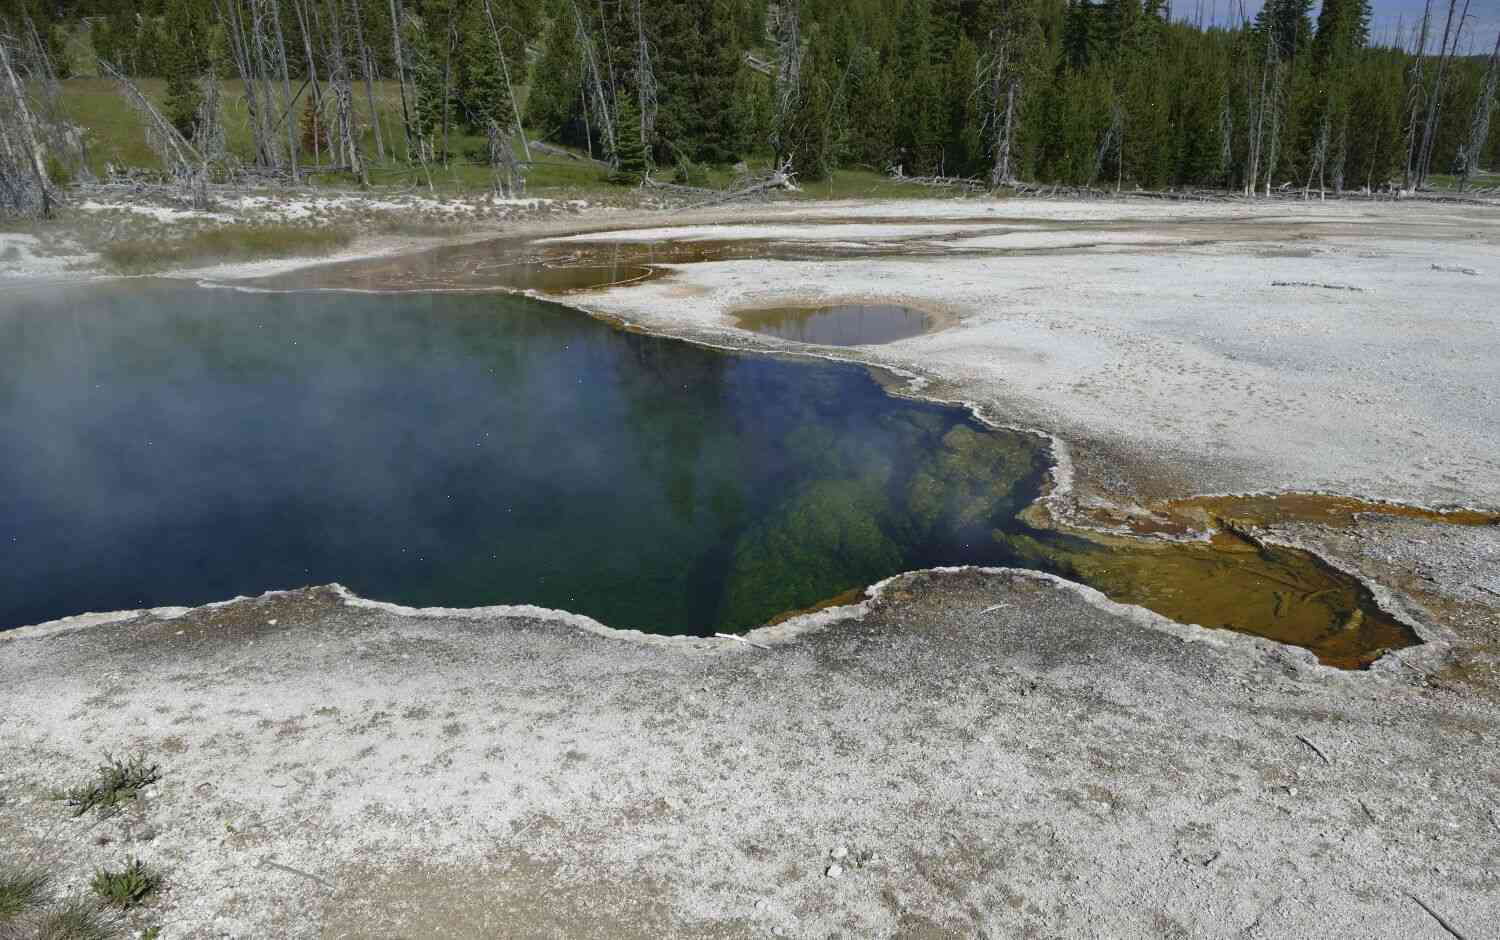 The first homicide in Yellowstone National Park since 1996